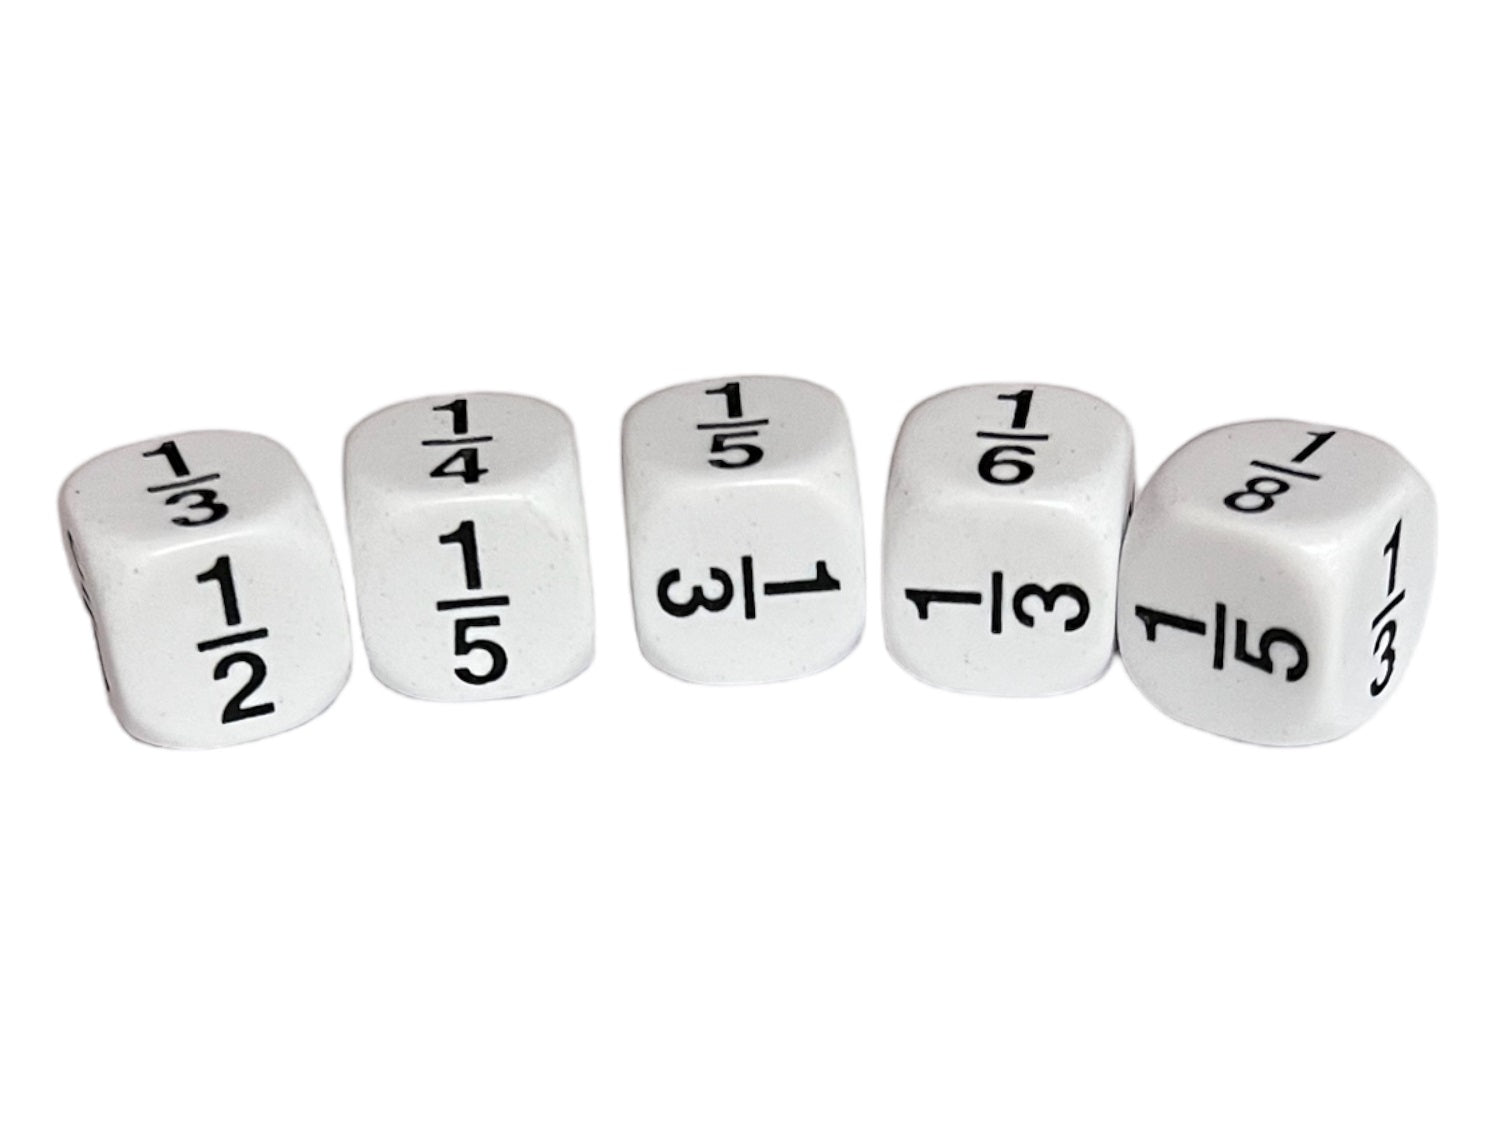 Dice - Fractions Dice (1/2, 1/3, 1/4, 1/5, 1/6, 1/8)